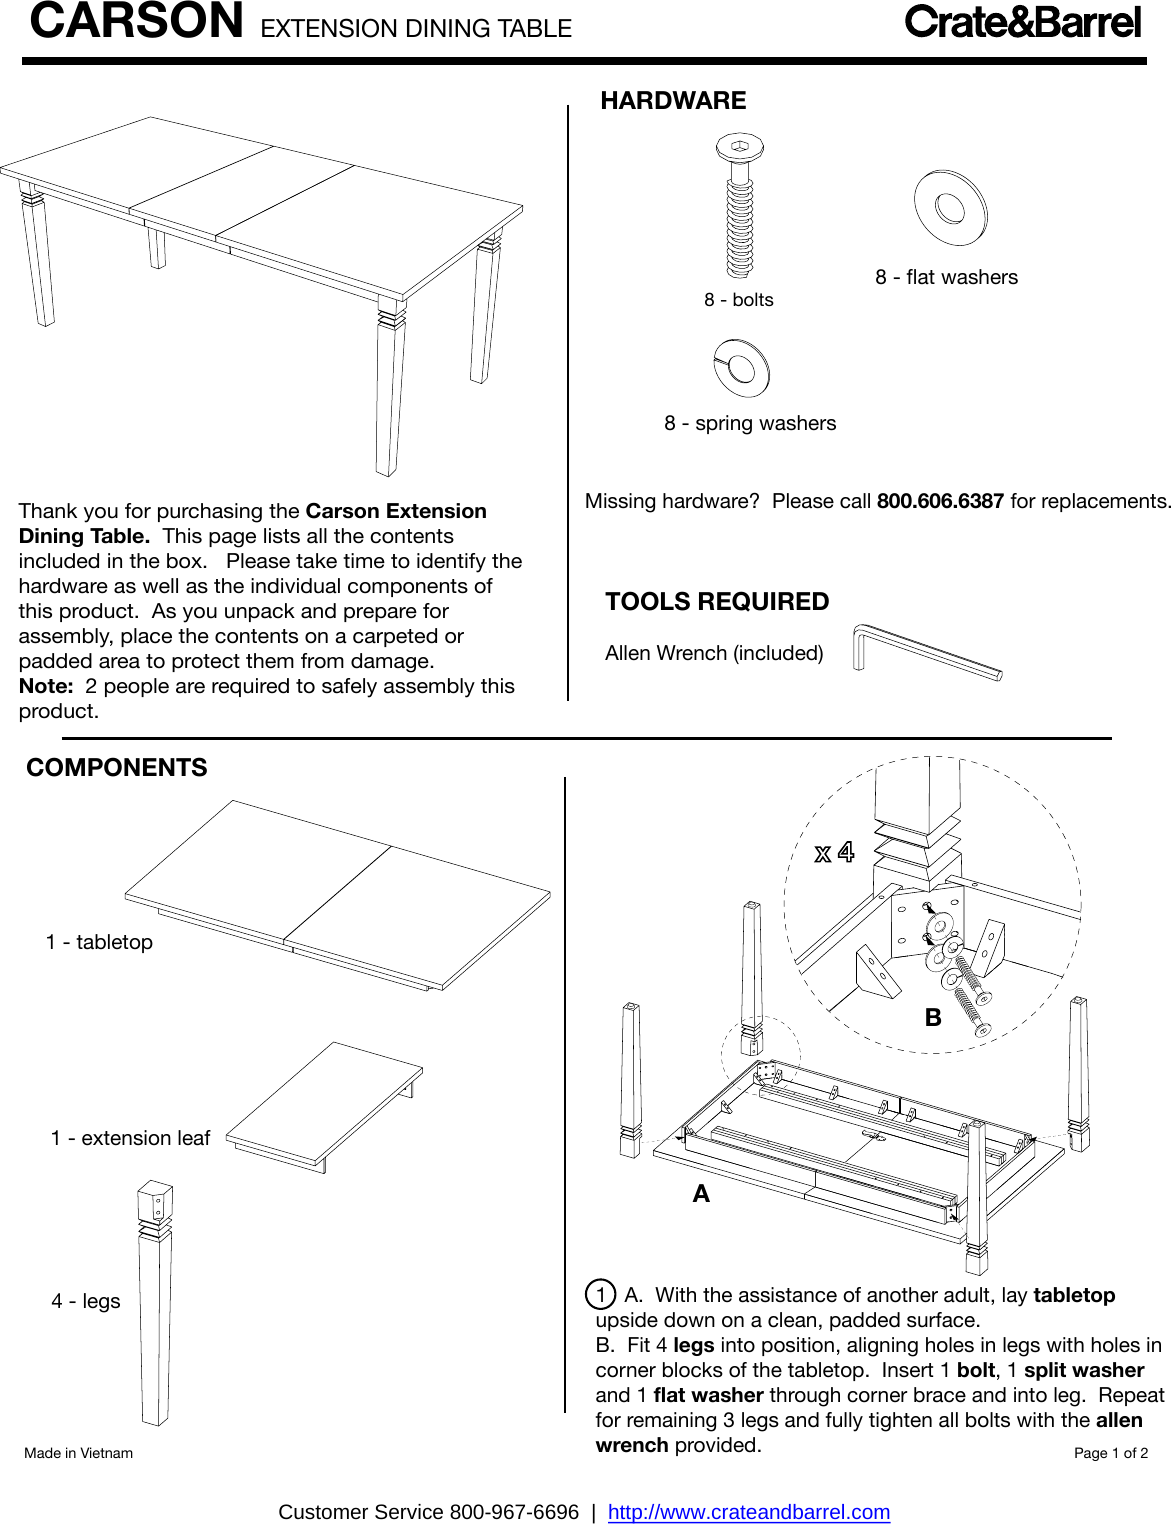 Page 1 of 2 - Crate-Barrel 363-Carson-Extension-Dining-Table Carson Extension Dining Table Assembly Instructions From Crate And Barrel